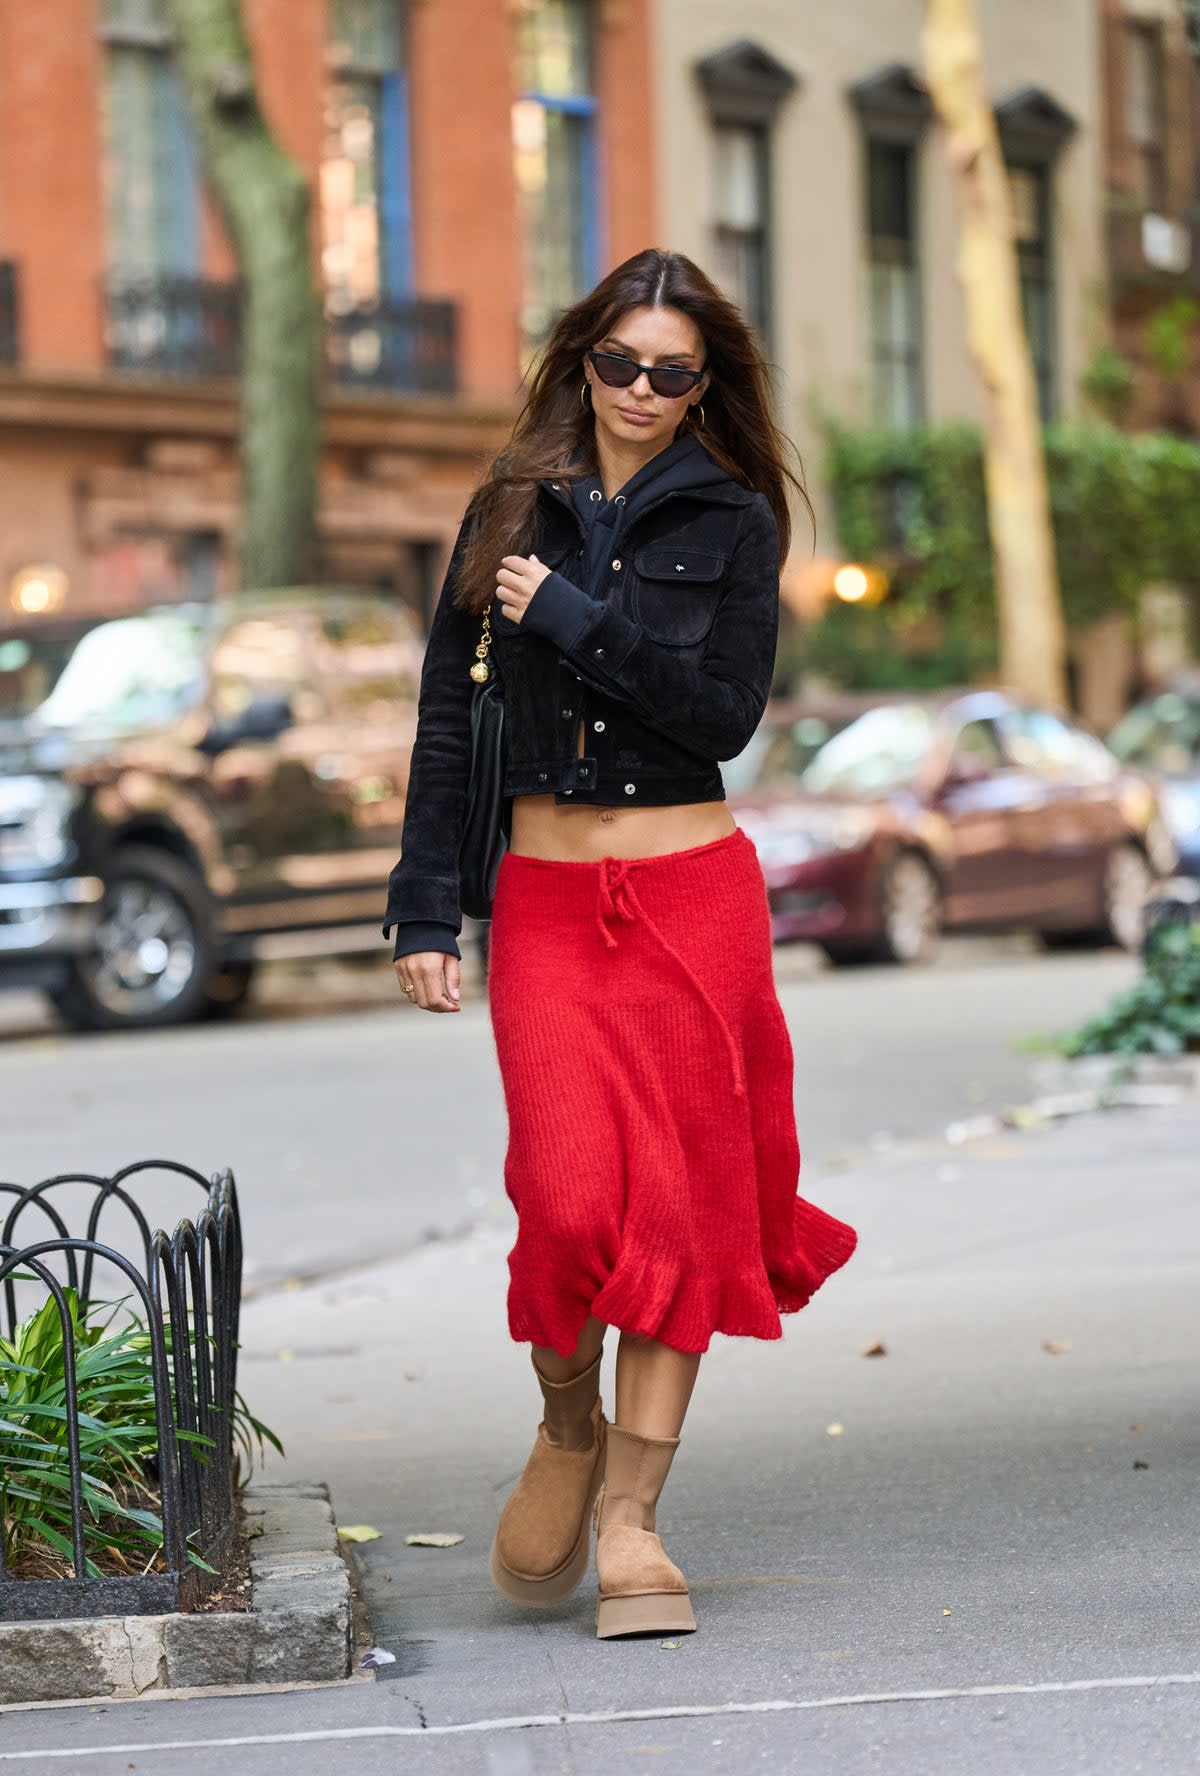 On trend: Emily Ratajkowski has been spotted wearing Uggs recently (GC Images)